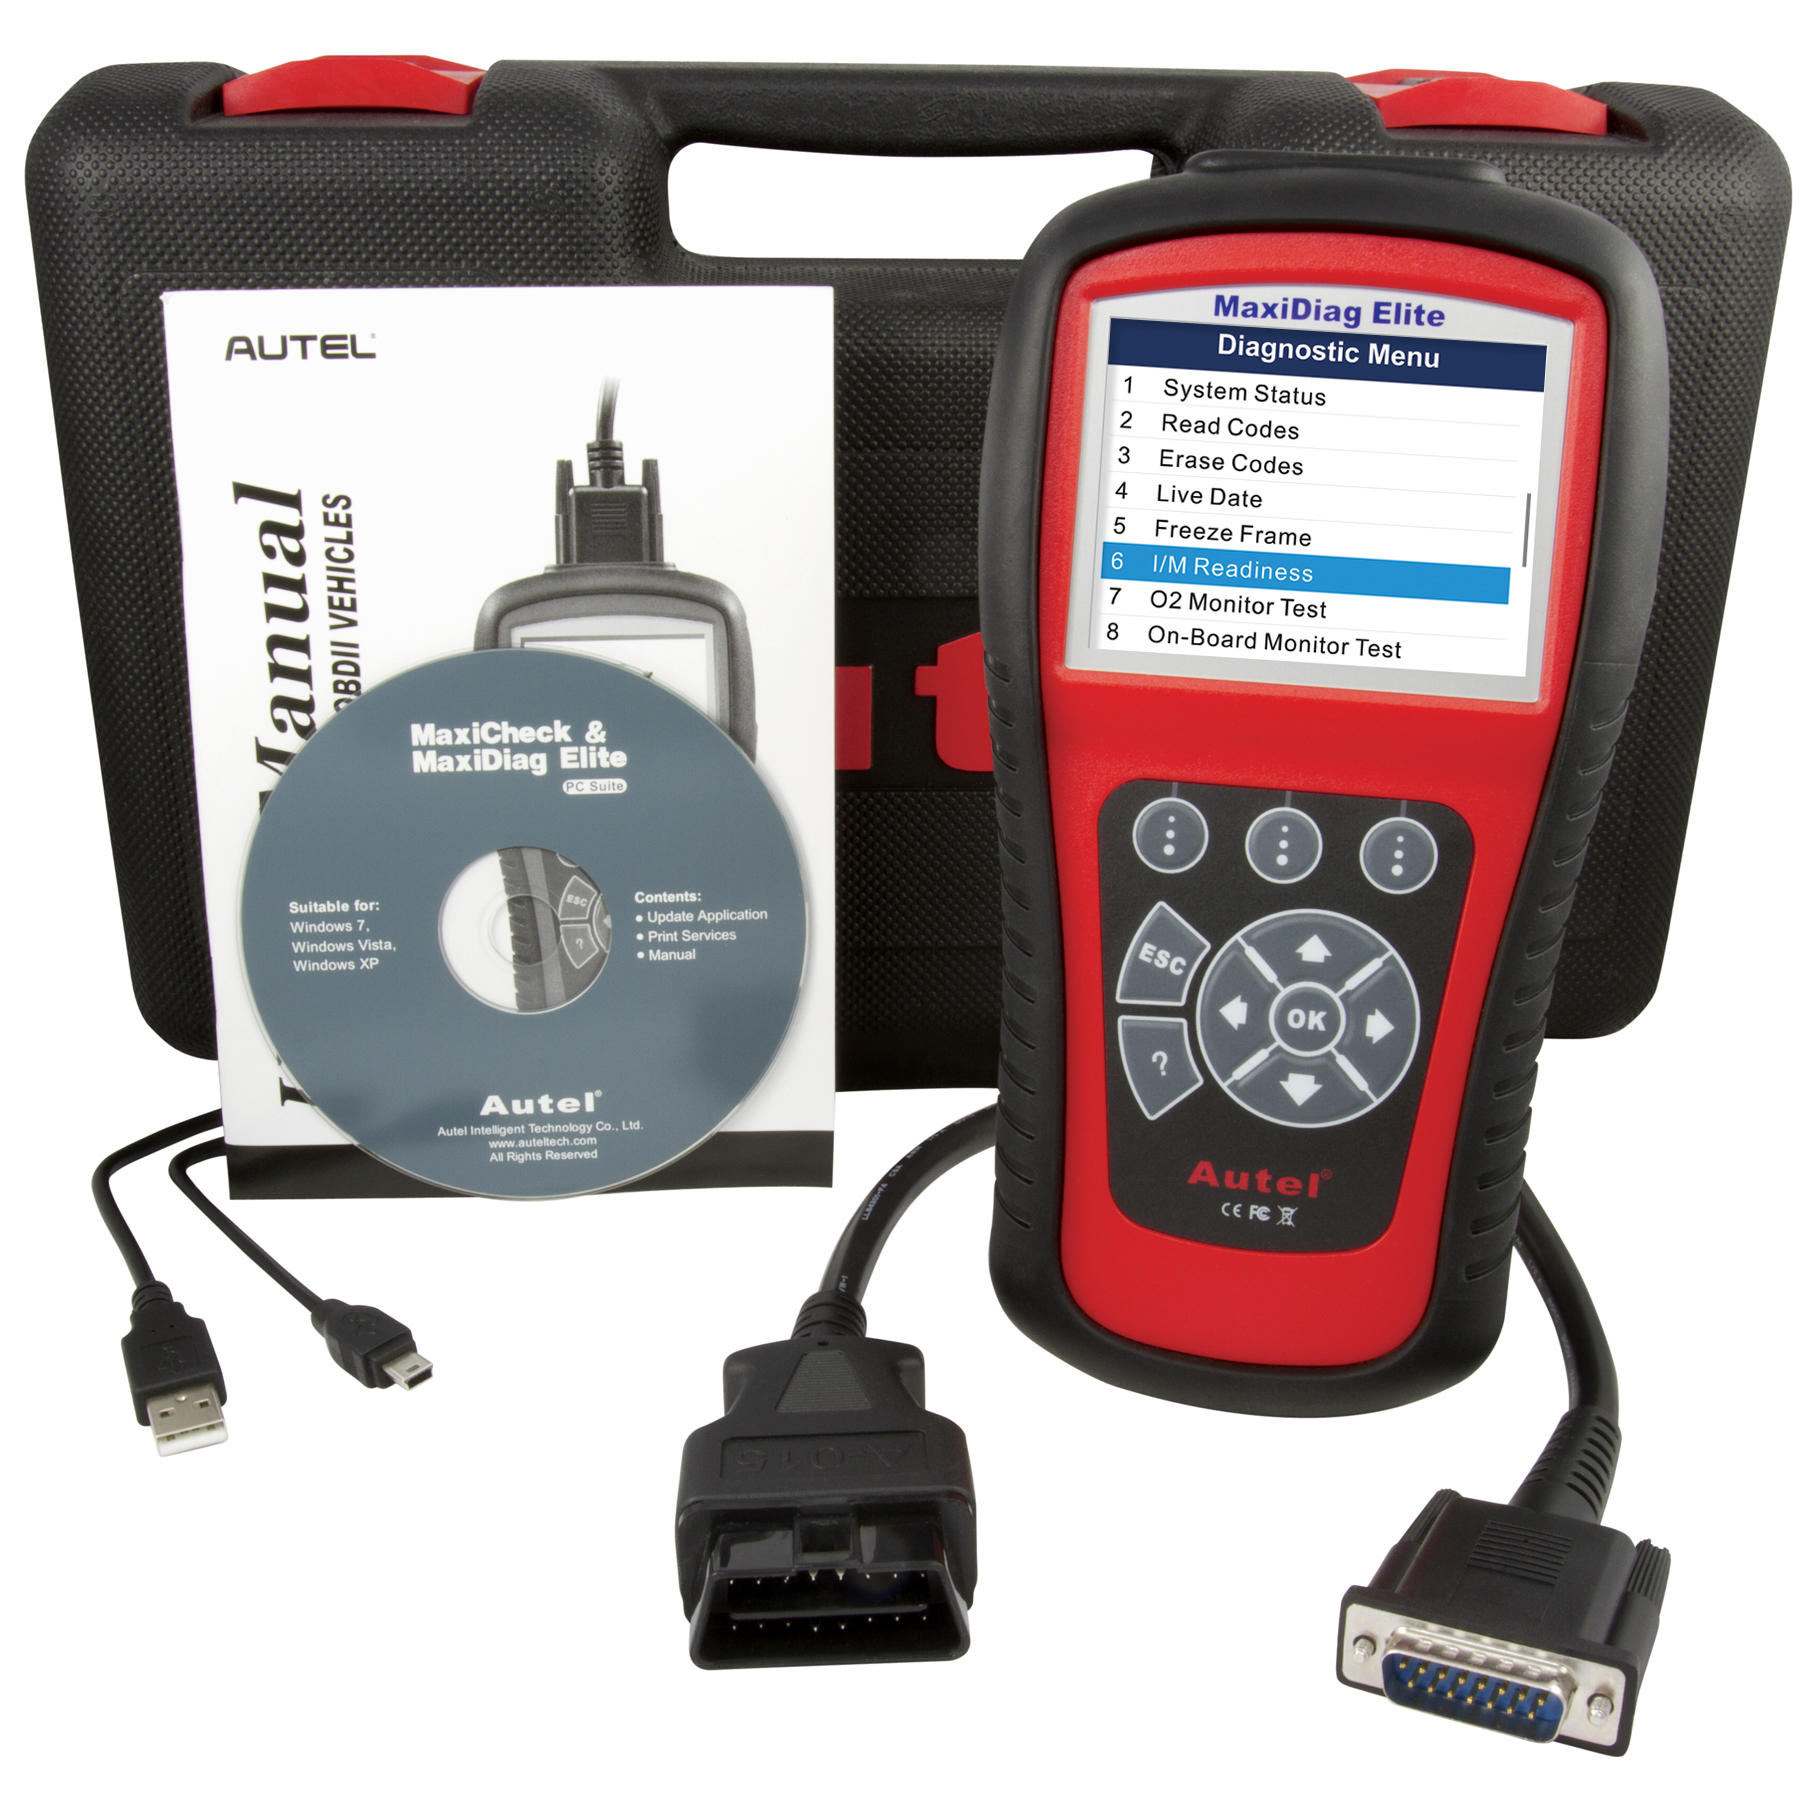 6937357200897 - AUTEL MD802 OBD2/EOBD SCAN TOOL FOR ENGINE, TRANSMISSION, ABS, AIRBAG,EPB,OIL SERVICE RESET (MD802(4 SYSTEM))